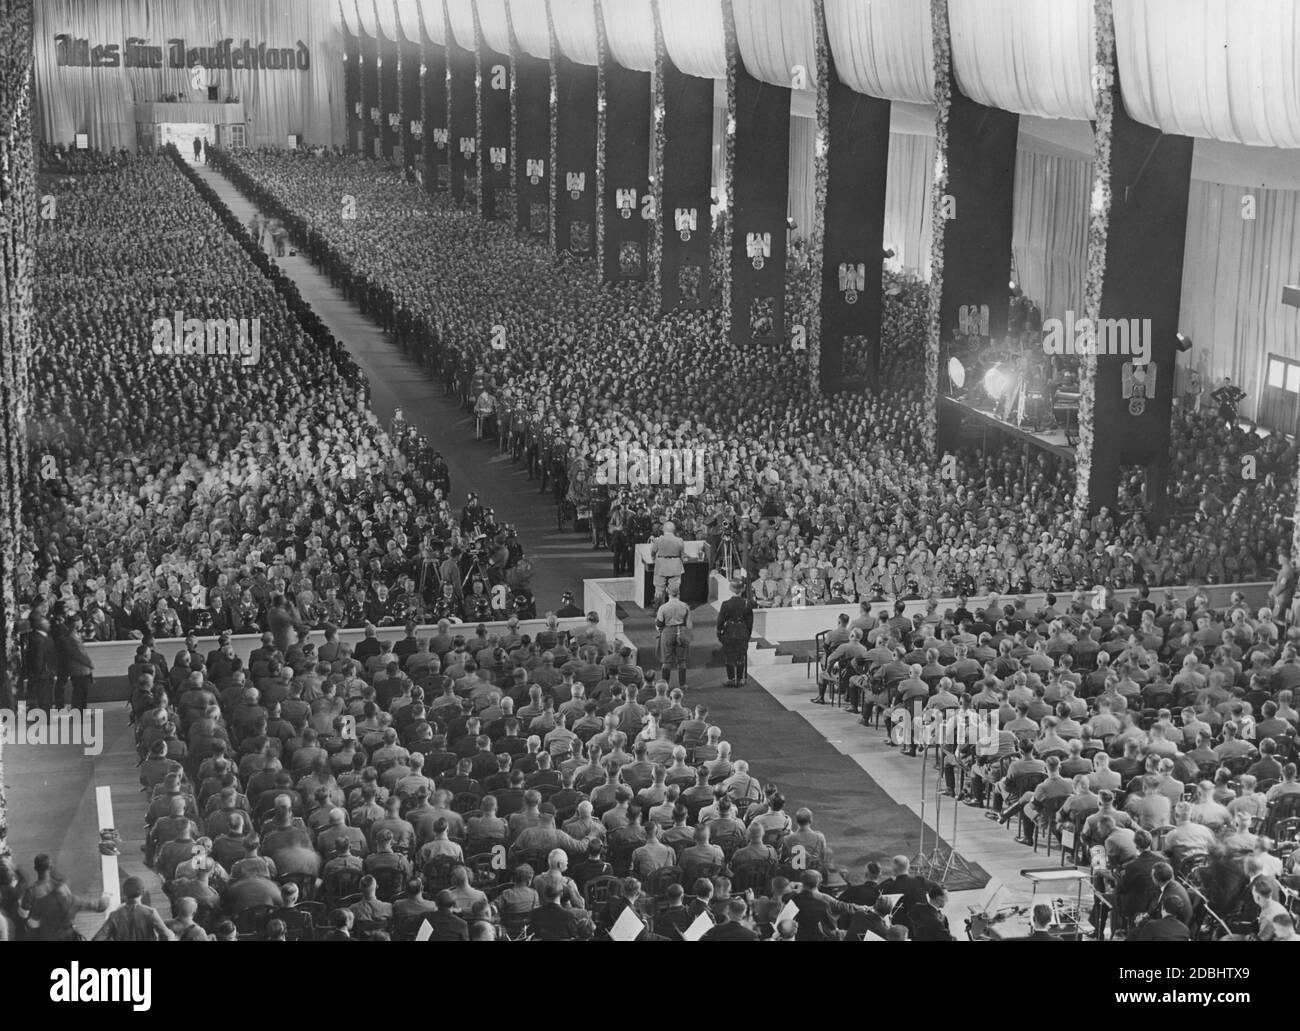 'Julius Streicher, Gauleiter of Franconia, gives a speech from the lectern at the opening ceremony of the Nazi Party Congress in Nuremberg in the festively decorated Luitpoldhalle on the Nazi Party Congress grounds. In the foreground is a music orchestra, on the right between two columns the drums. On the opposite wall is the inscription ''All for Germany''.' Stock Photo